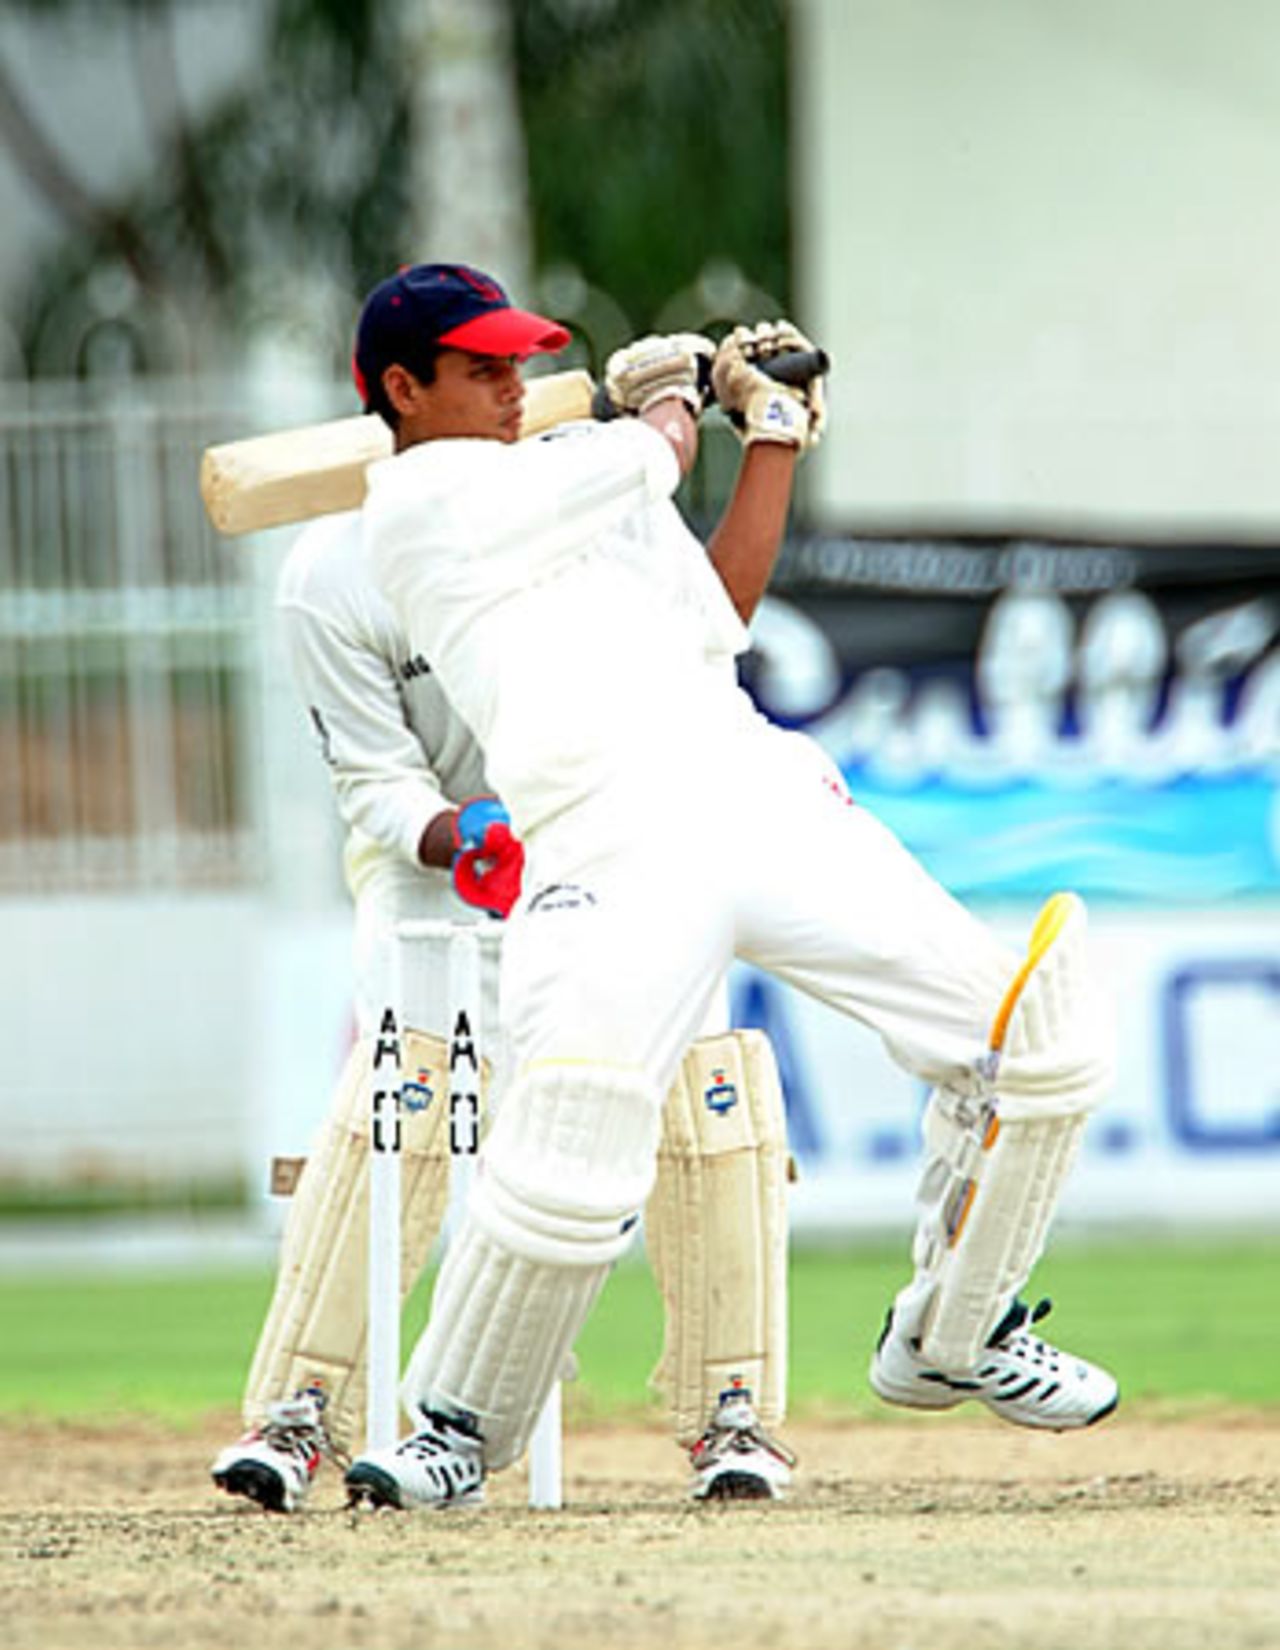 Prem Chaudhary of Nepal pulls on his way to 25, Nepal Under-19s v Singapore Under-19s at Asghar Ali Shah Stadium Karachi, Youth Asia Cup 2003, 22 July 2003.